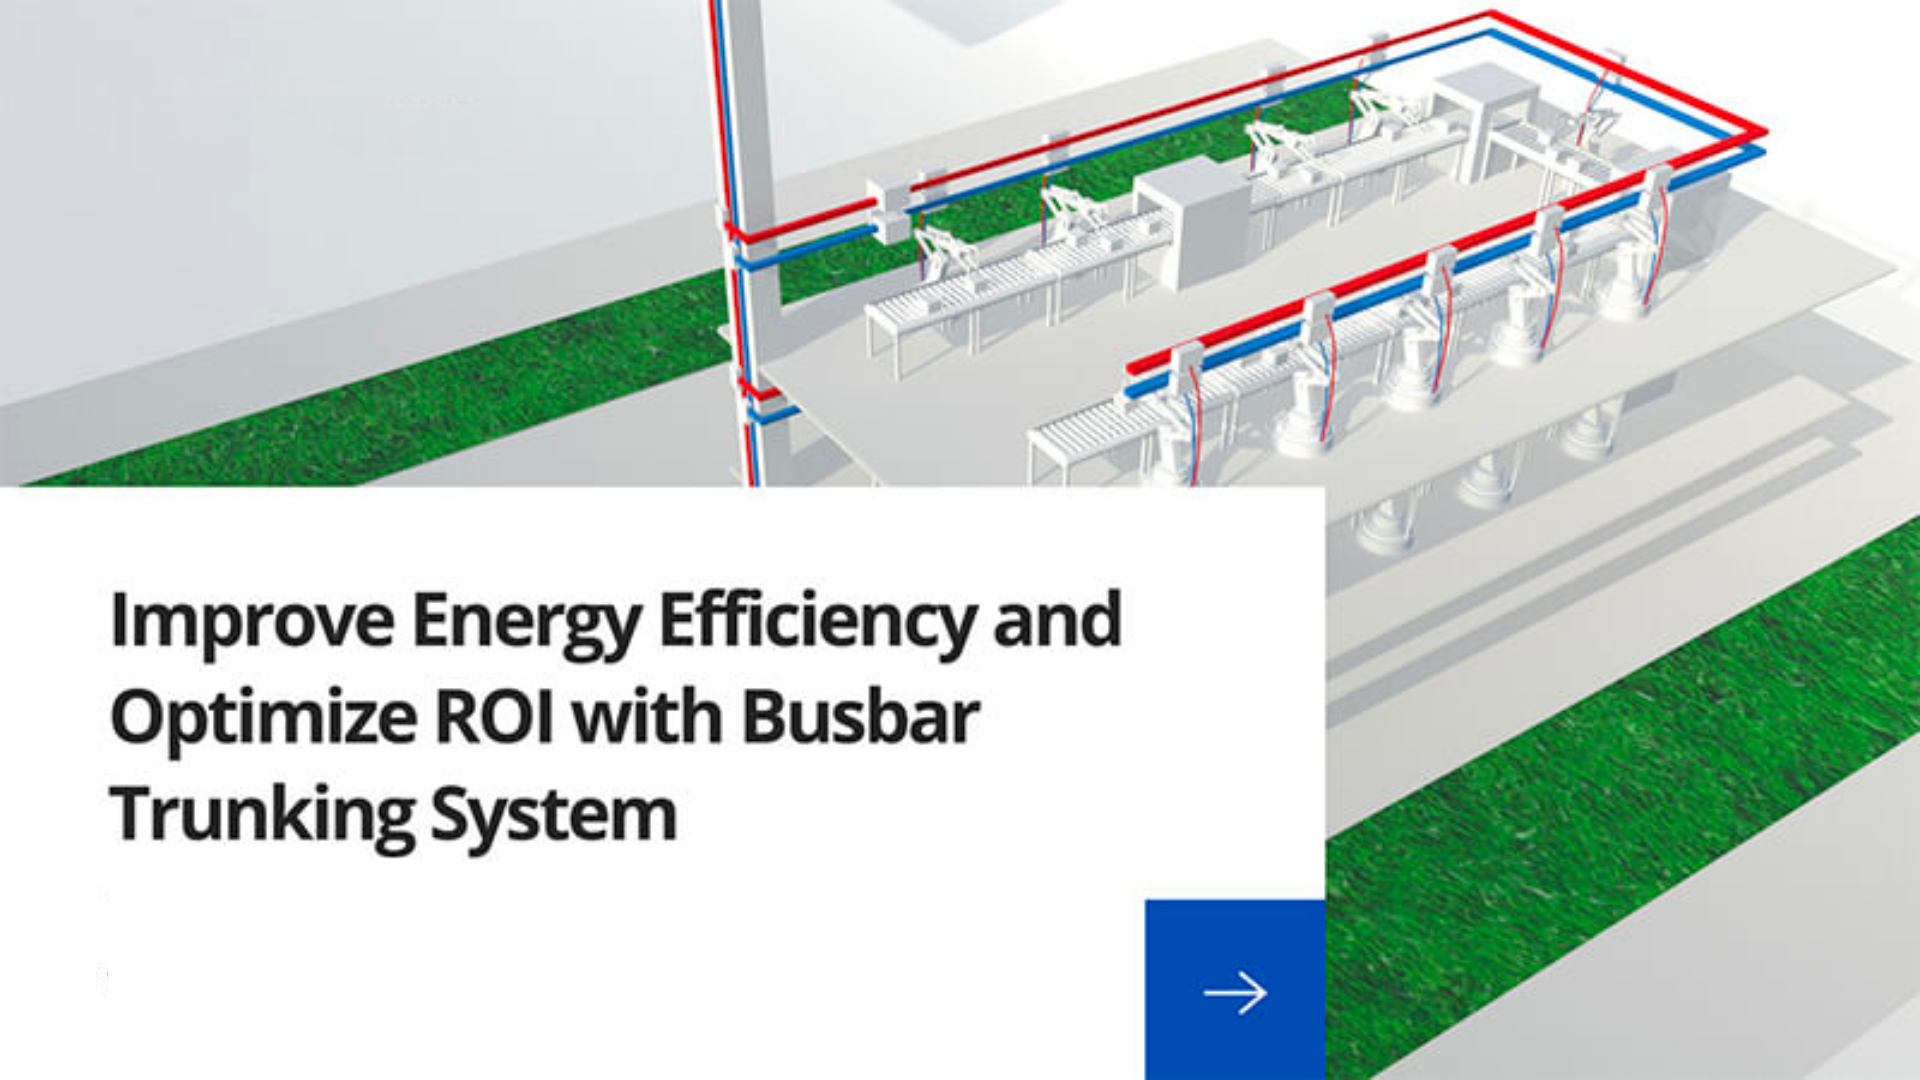 Webinars to Improve Energy Efficiency and Optimize ROI with BTS